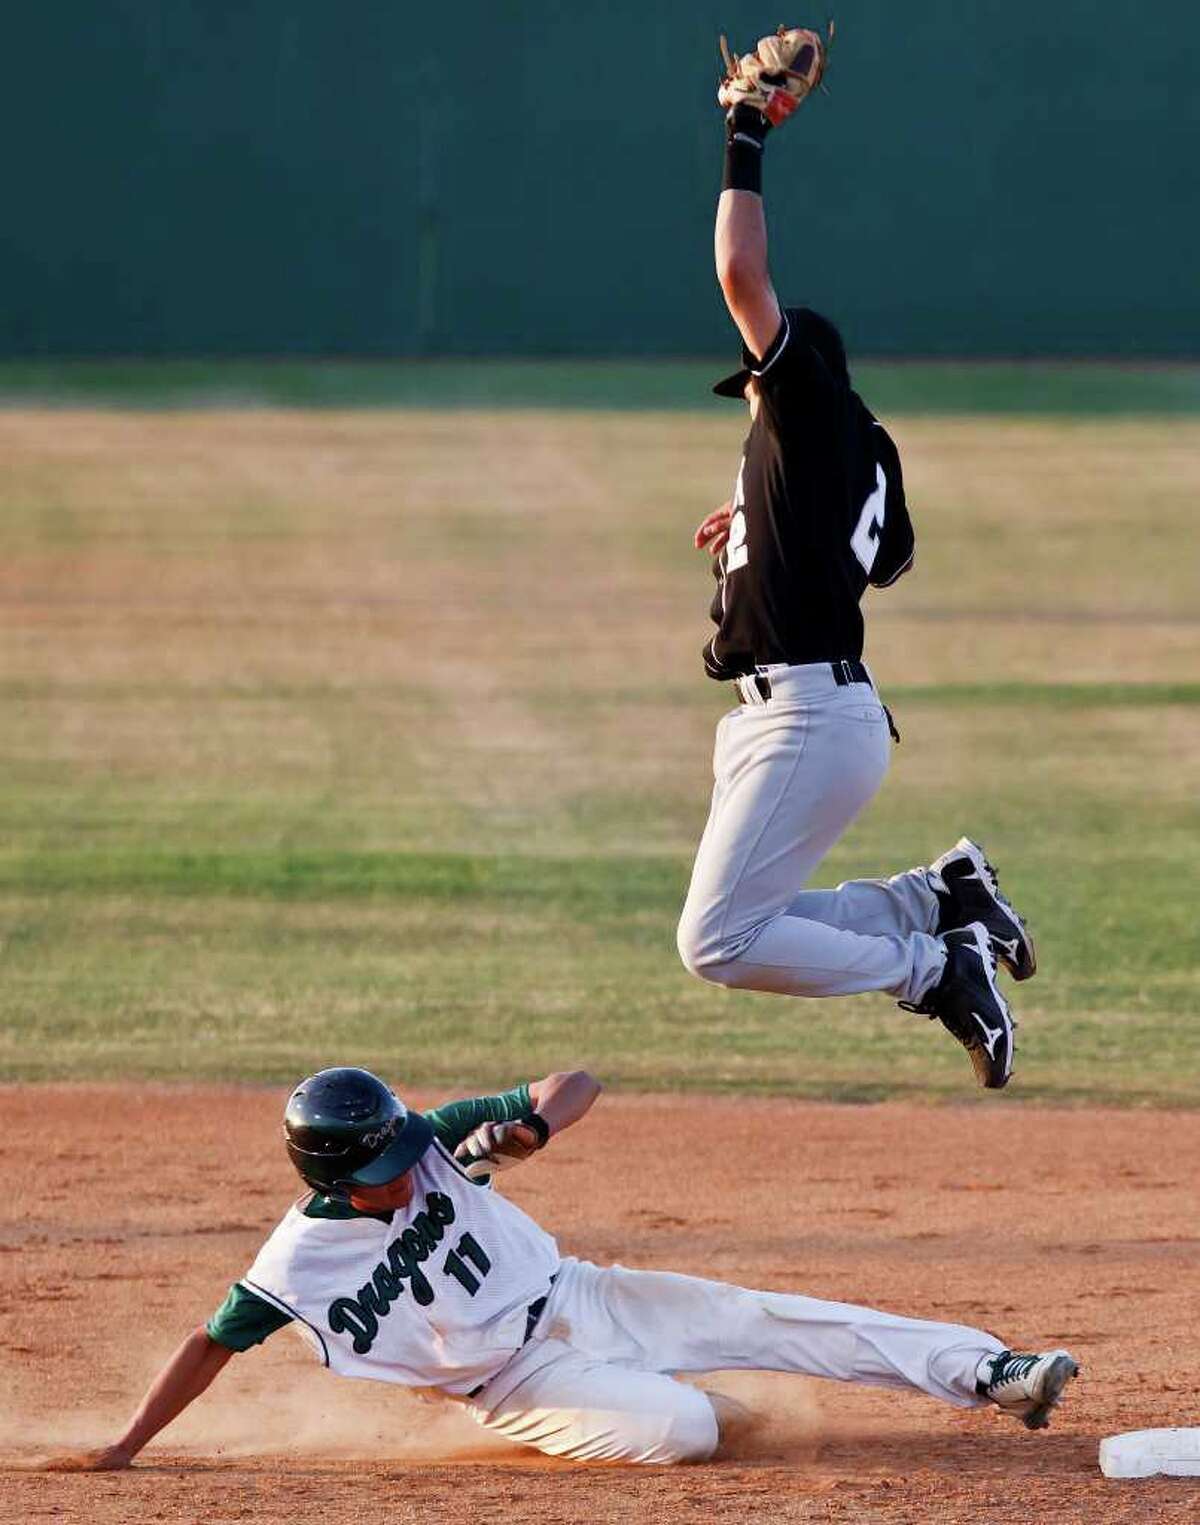 Clark shortstop Jason Cervantes leaps high into the air to catch a throw from third base as Southwest's Edgar Vaszuez slides safely back to second base during the Cougar's 3-2 first round playoff victory over the Dragons at Northside Field #2 on May 5, 2011. MARVIN PFEIFFER/mpfeiffer@express-news.net